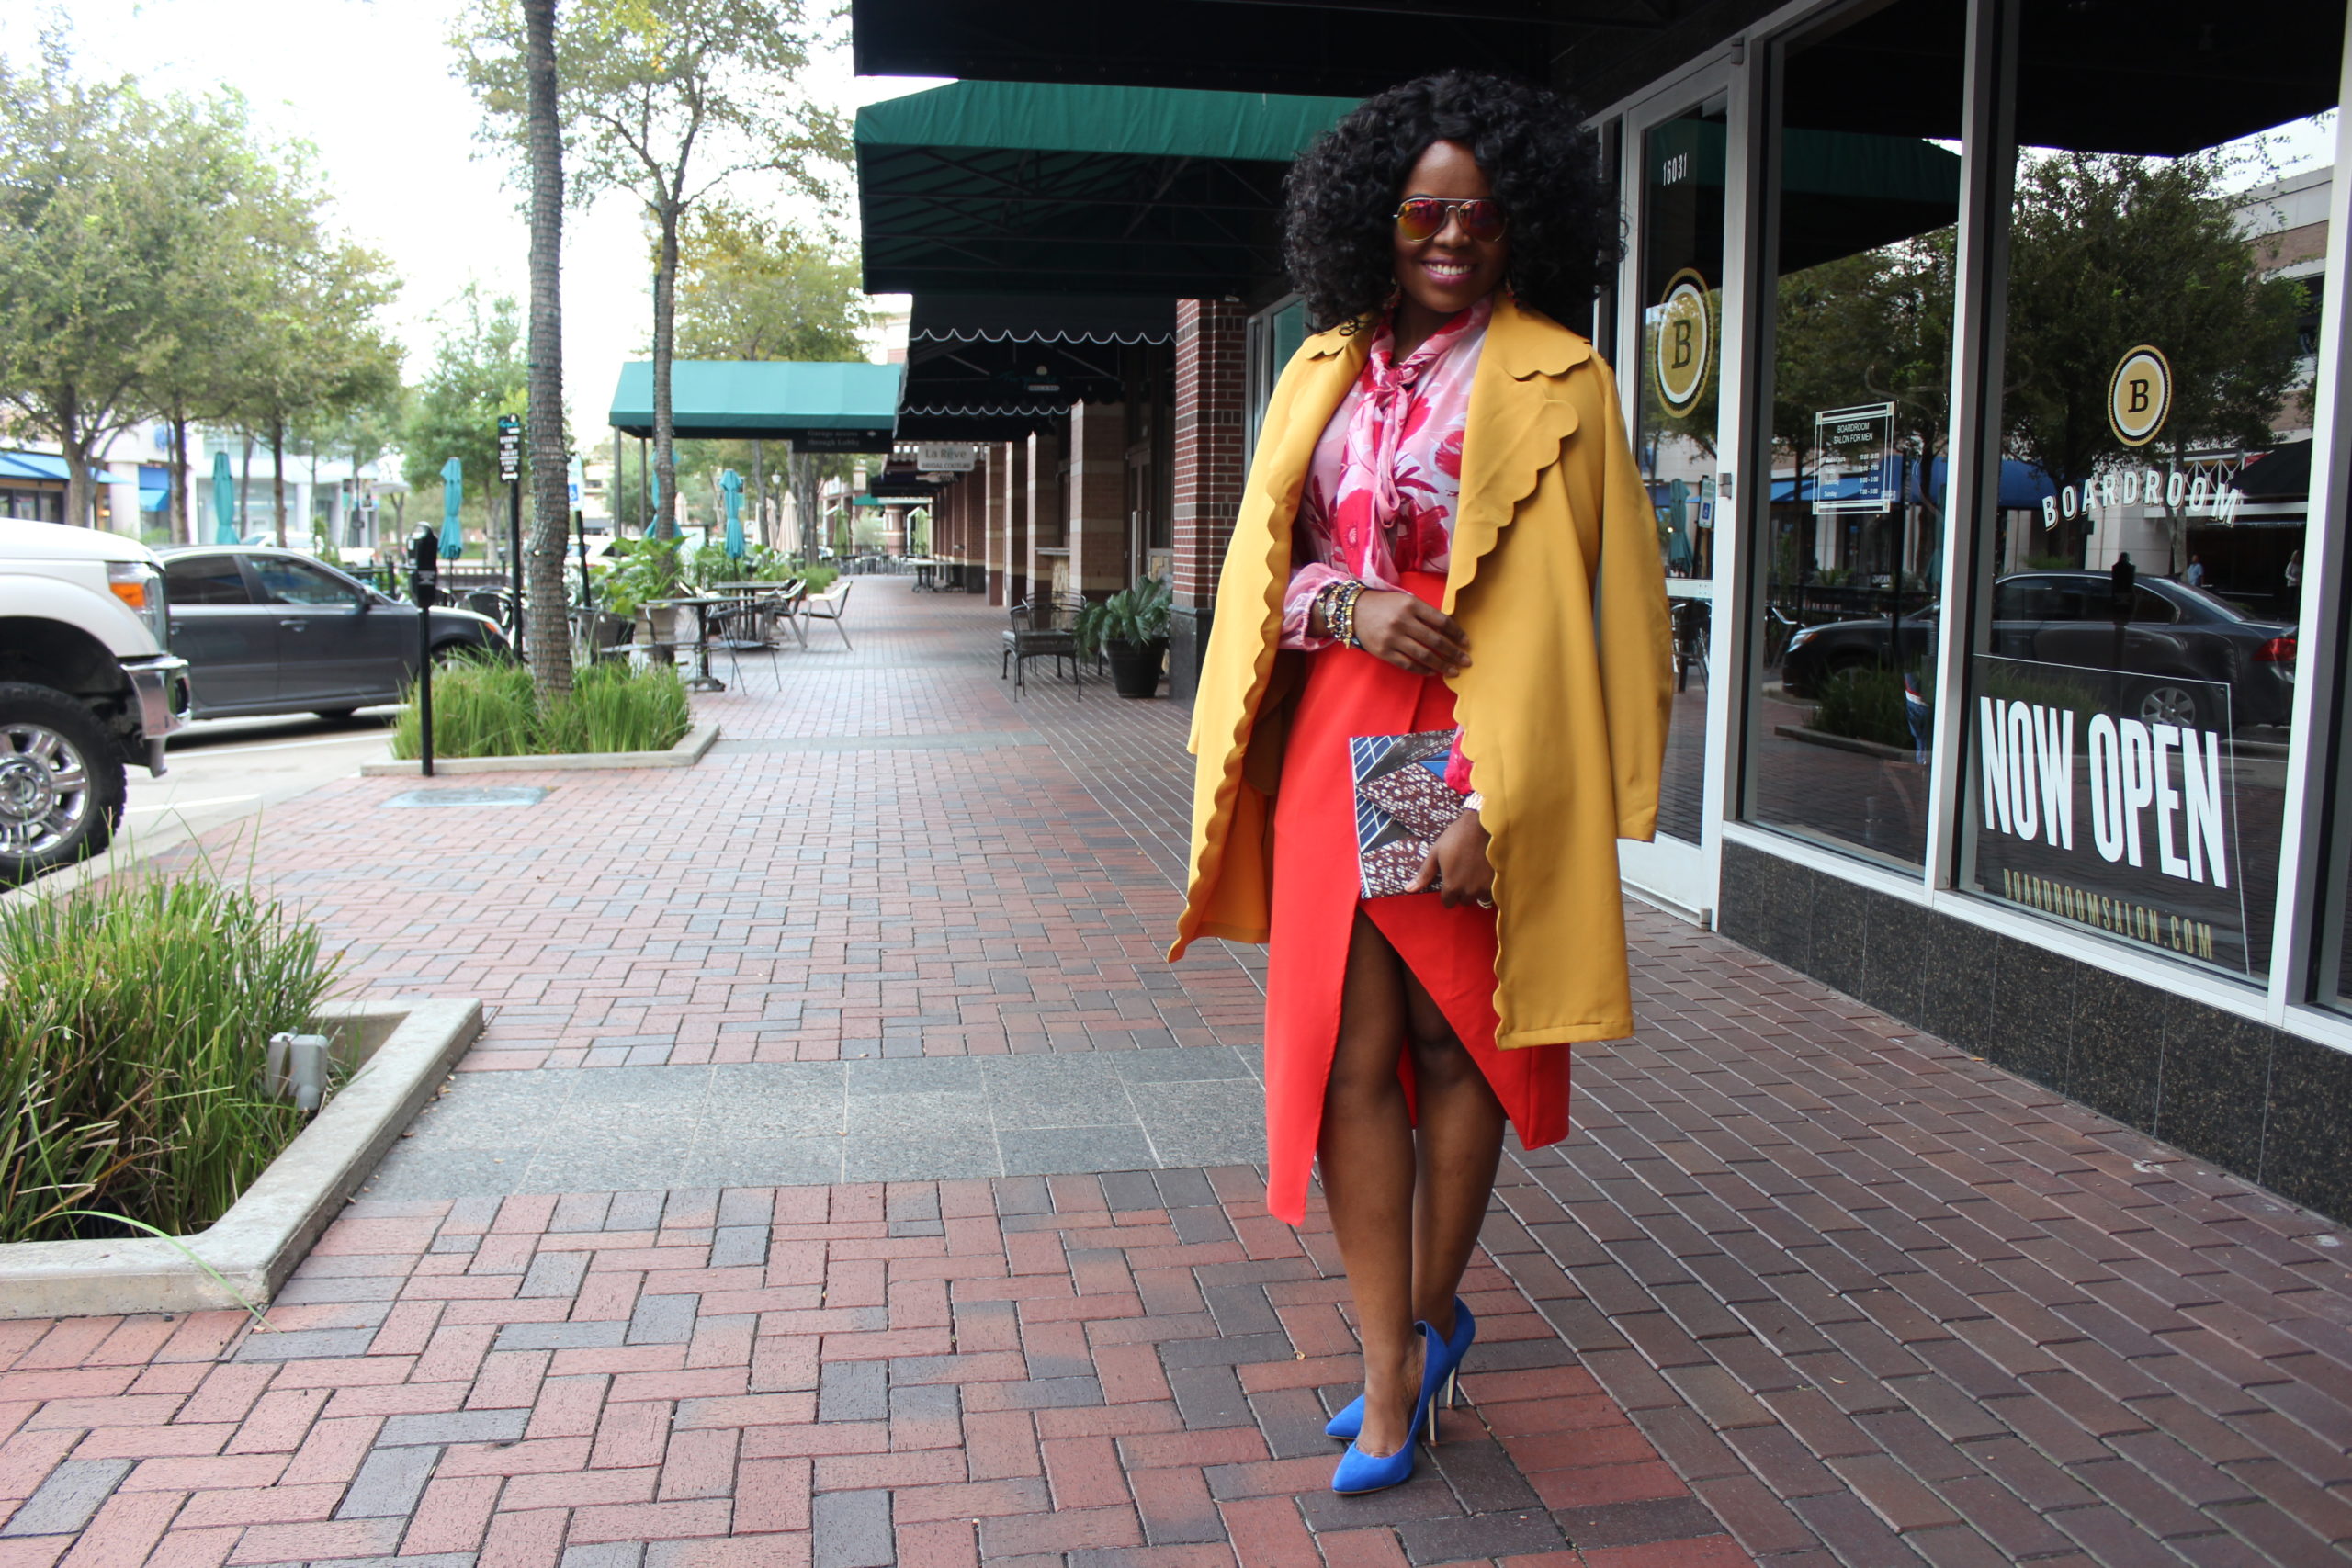 How To Mix Colors + Being Authentic Bold Confident Color Block Art Fashion Life Style Eva Mendes Collection NY and Company Red Floral Isabella Bow Blouse Asos Asymetrical Pencil Skirt Missguided SheIn Yellow Scallop Trim Self Belt Coat Blue Shoedazzle Pumps Cobalt Blue Nordstrom Rack DSW Heels African Print Ankara Clutch Purse Handbag 3reec's Chic Creations and Collections